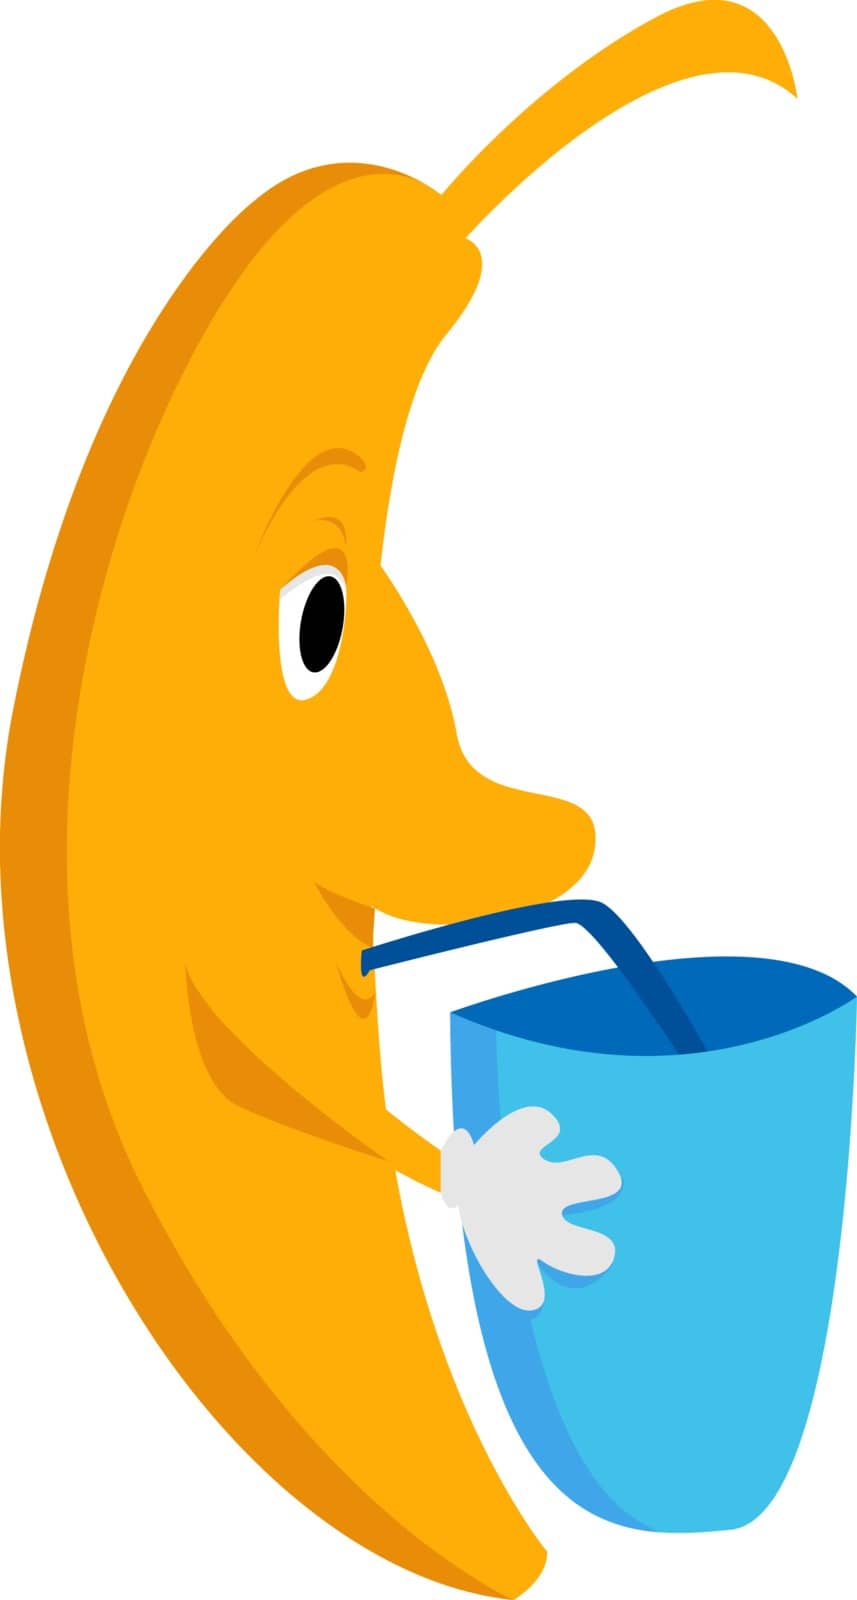 Banana with water, illustration, vector on white background.